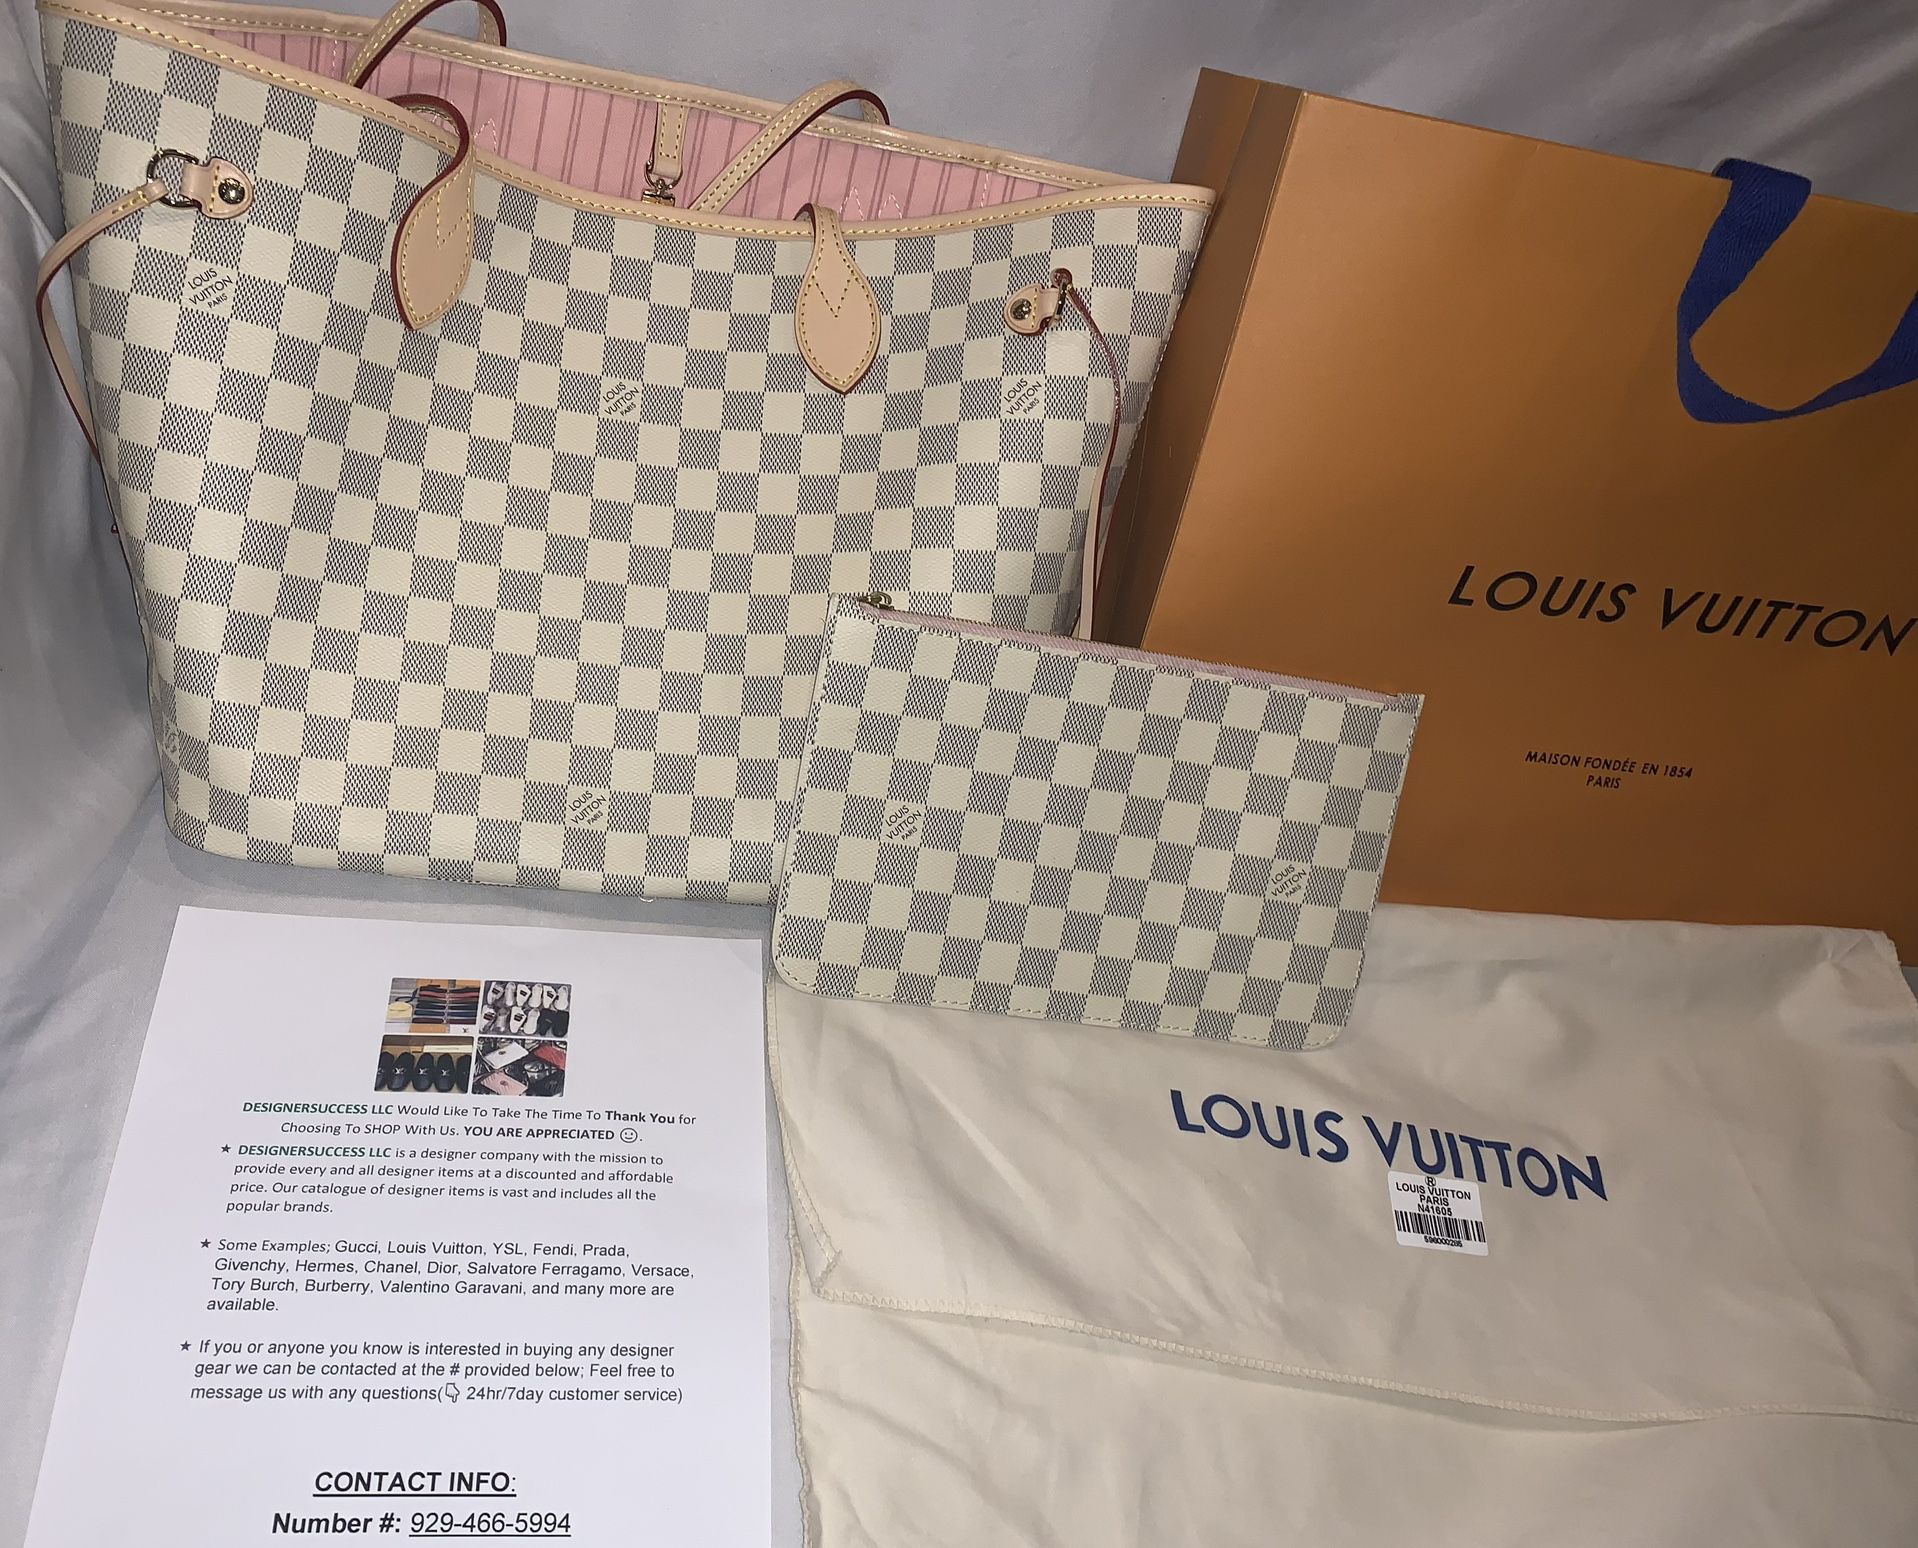 New Authentic Louis Vuitton Damier Azur Pink/Rose Ballerine Interior Neverfull  MM Handbag for Sale in Valley Stream, NY - OfferUp